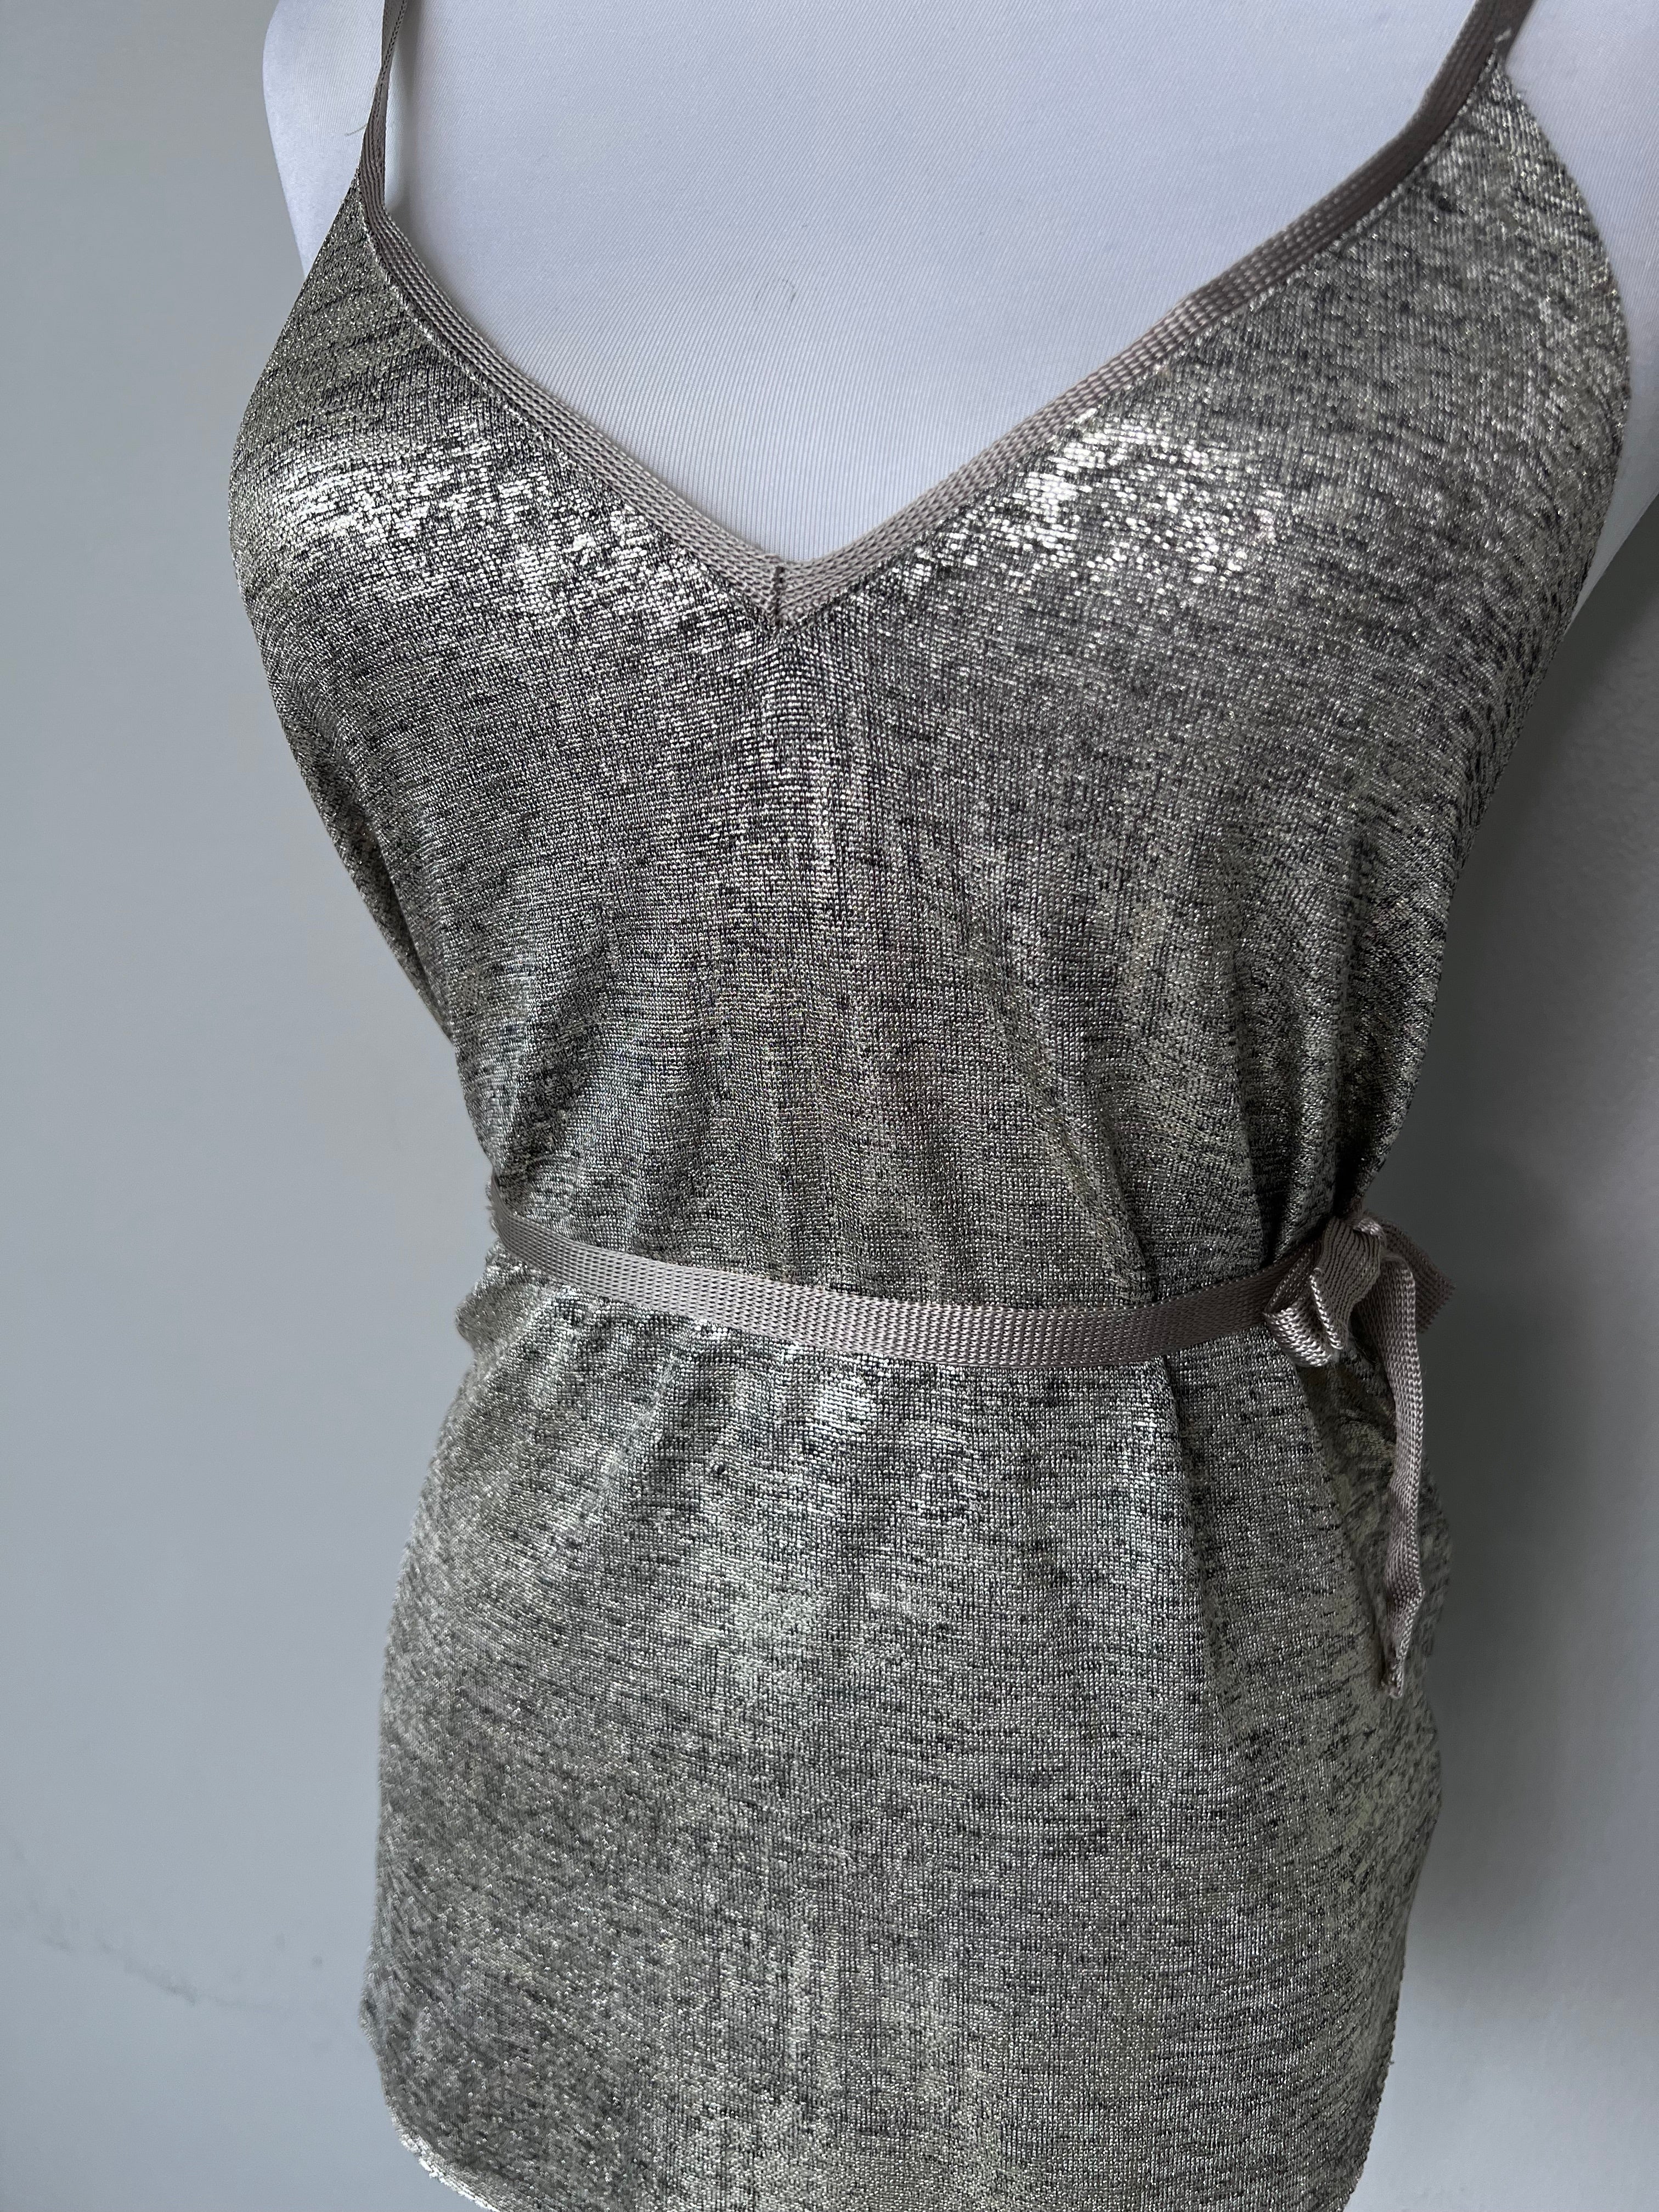 Silver Zara spaghetti strap top with reflective material, deep v neck and has tie up detailing in the back. - ZARA